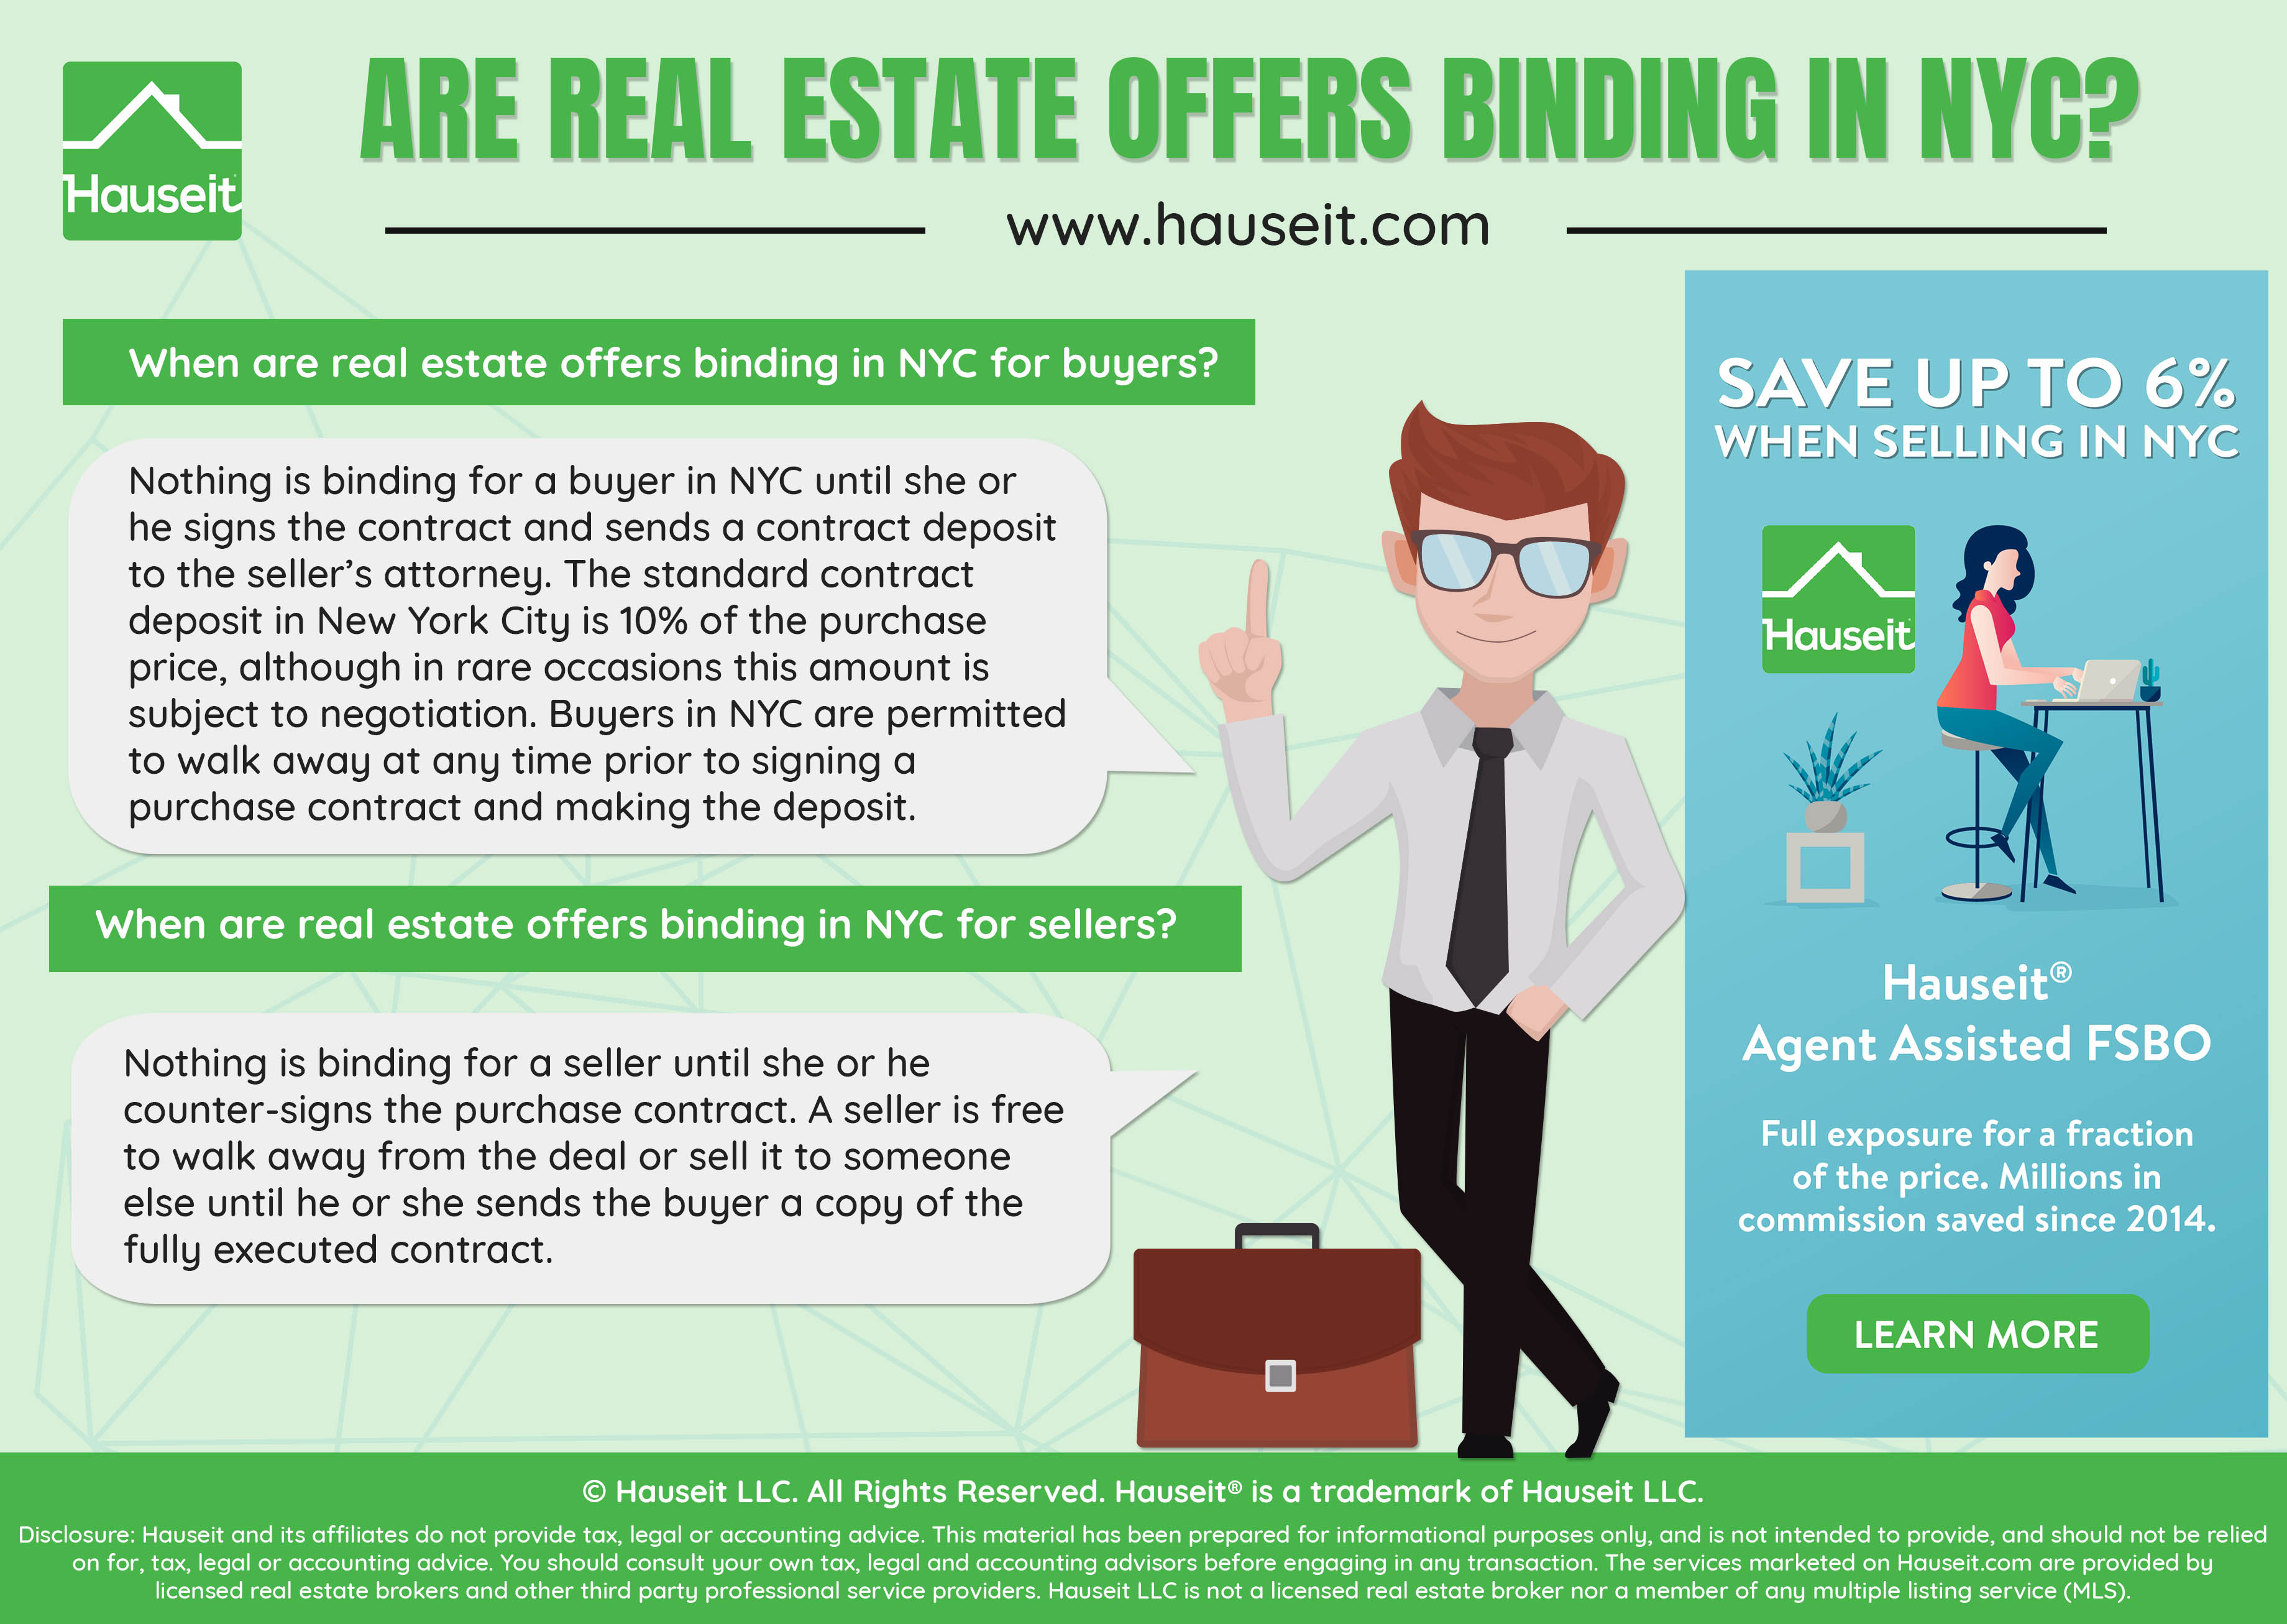 Are Real Estate Offers Binding in NYC? The question of whether real estate offers are binding in NYC is one of the most commonly discussed topics among buyers, sellers and brokers.